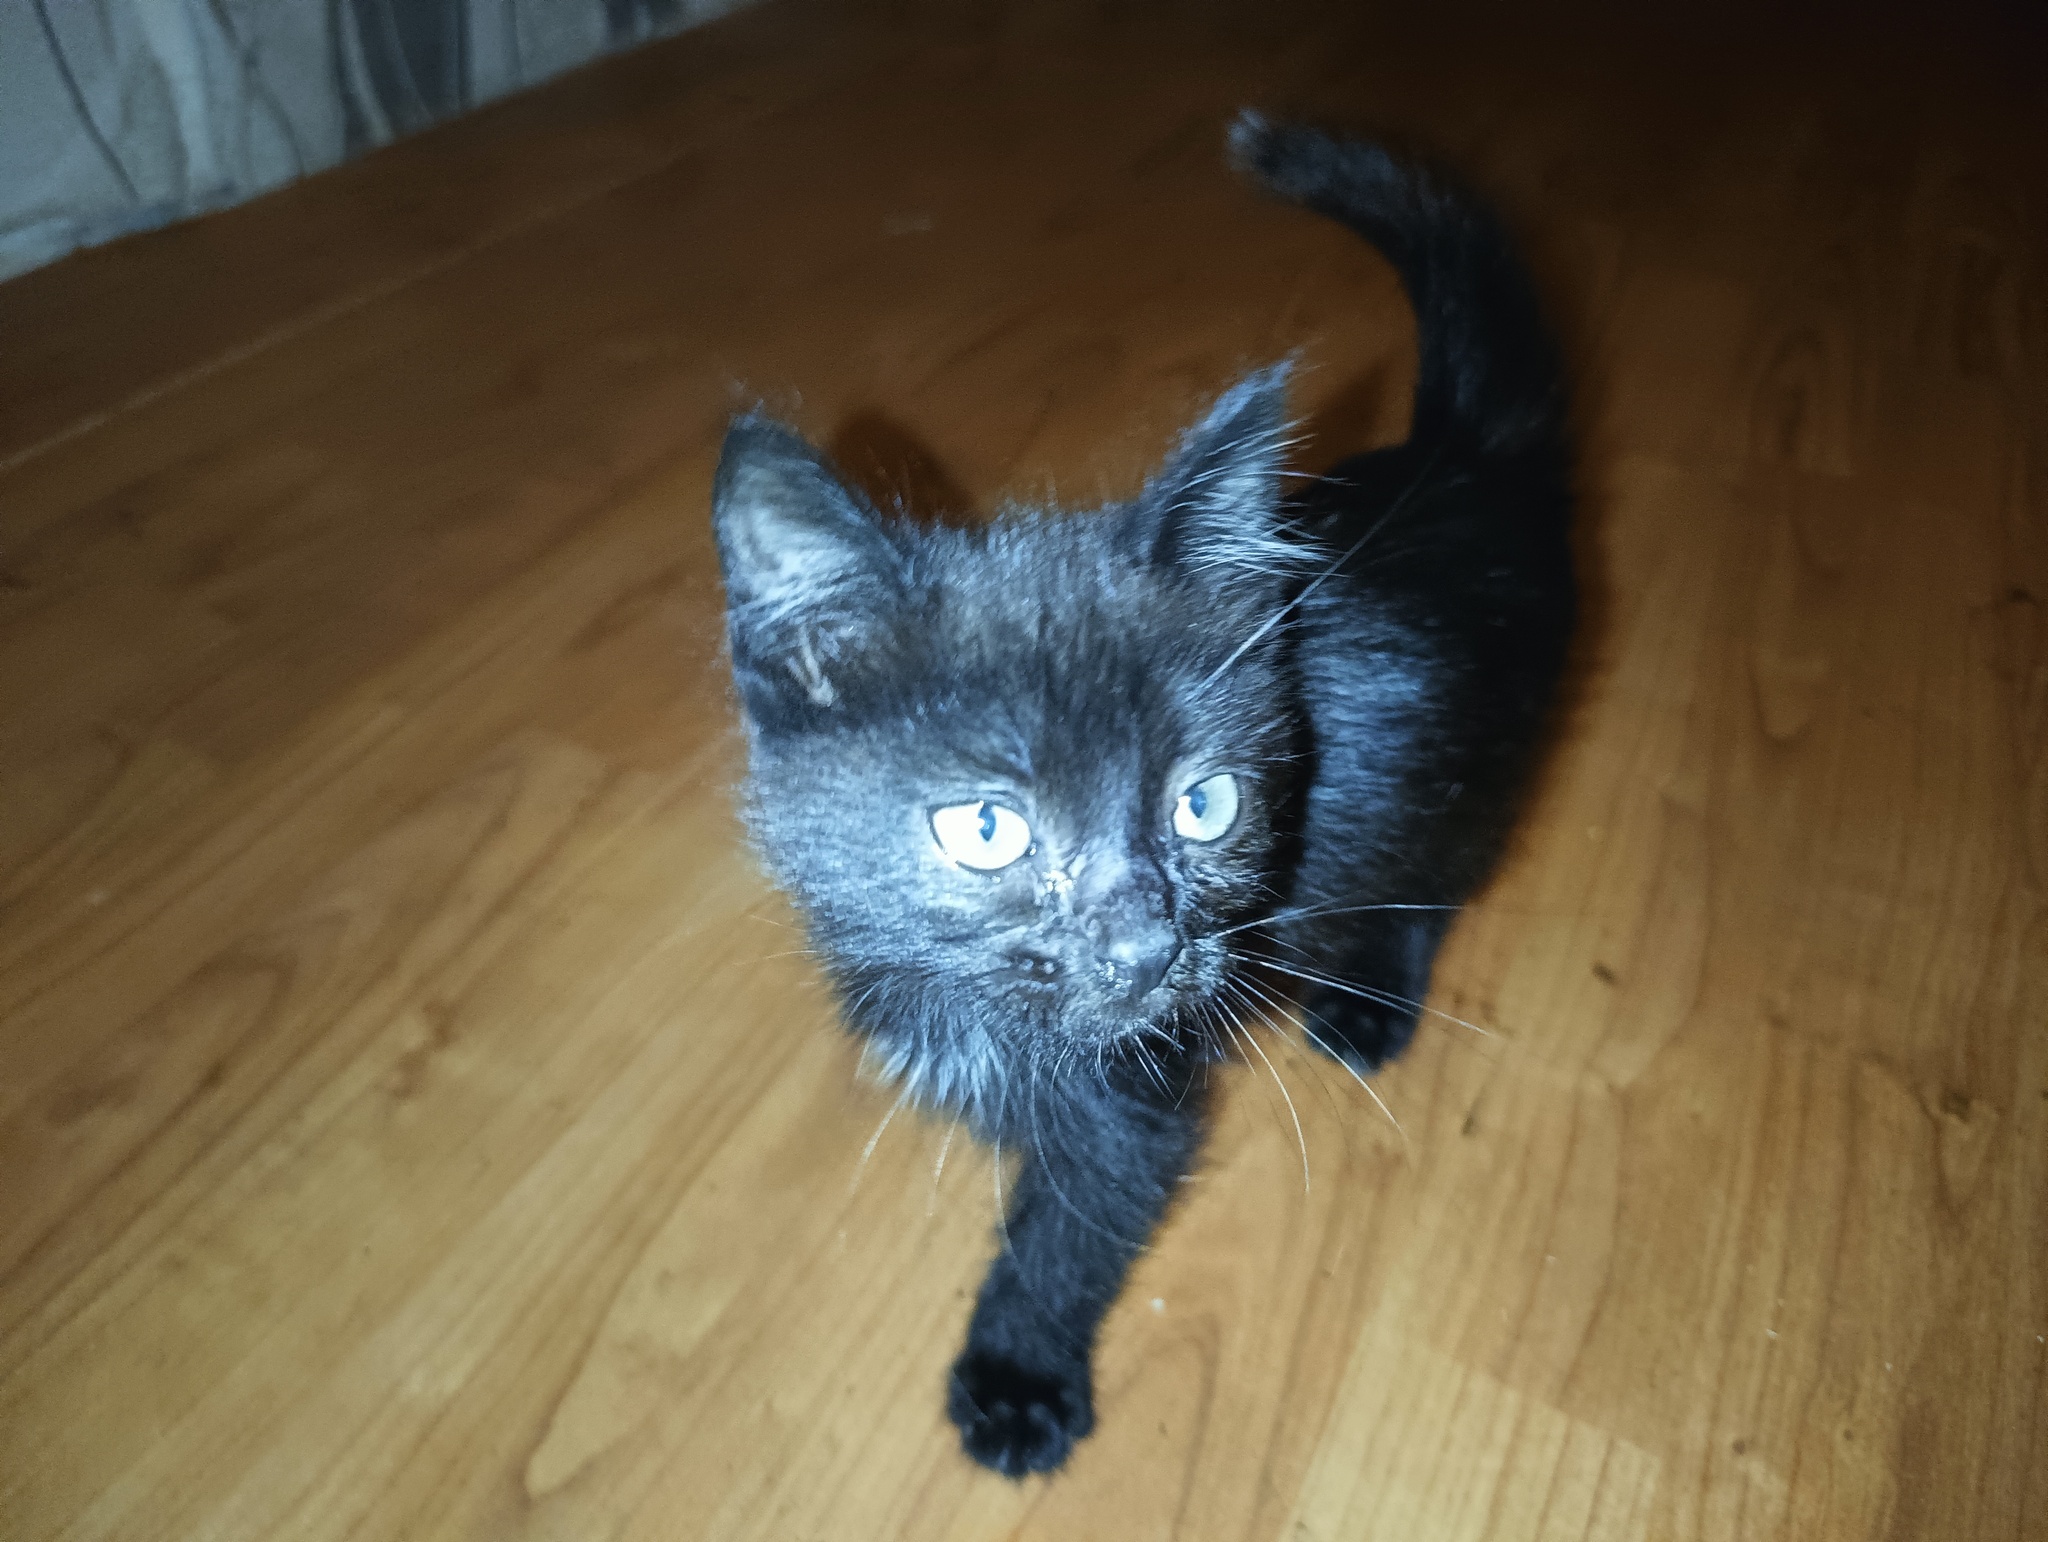 Kitten needs a home - Kittens, Pets, Animal shelter, In good hands, Black cat, Help, Helping animals, Longpost, No rating